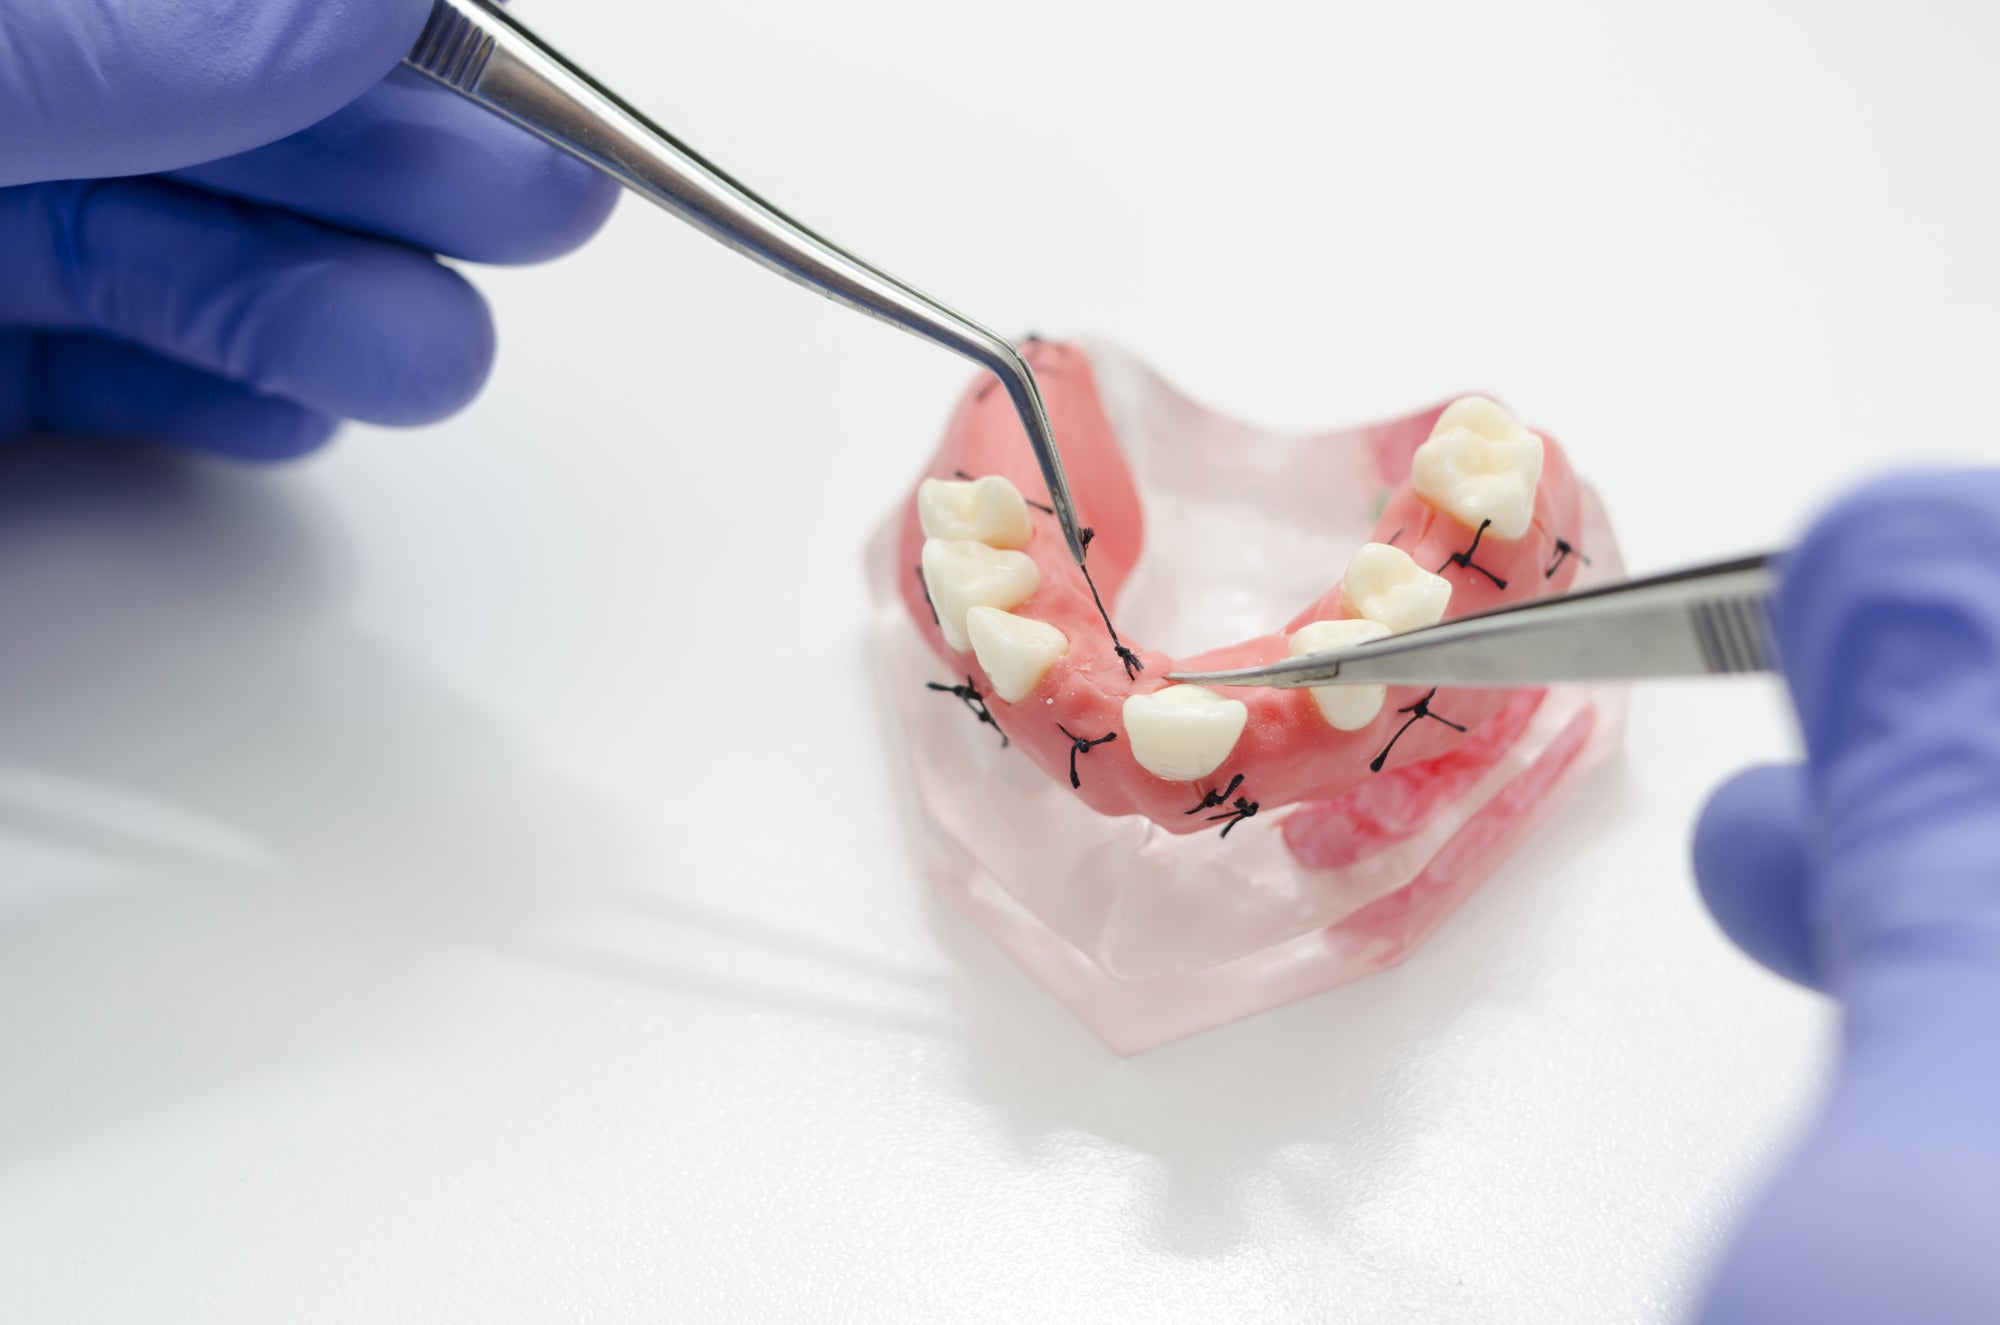 Dental Sutures: Procedure, Care And Benefits